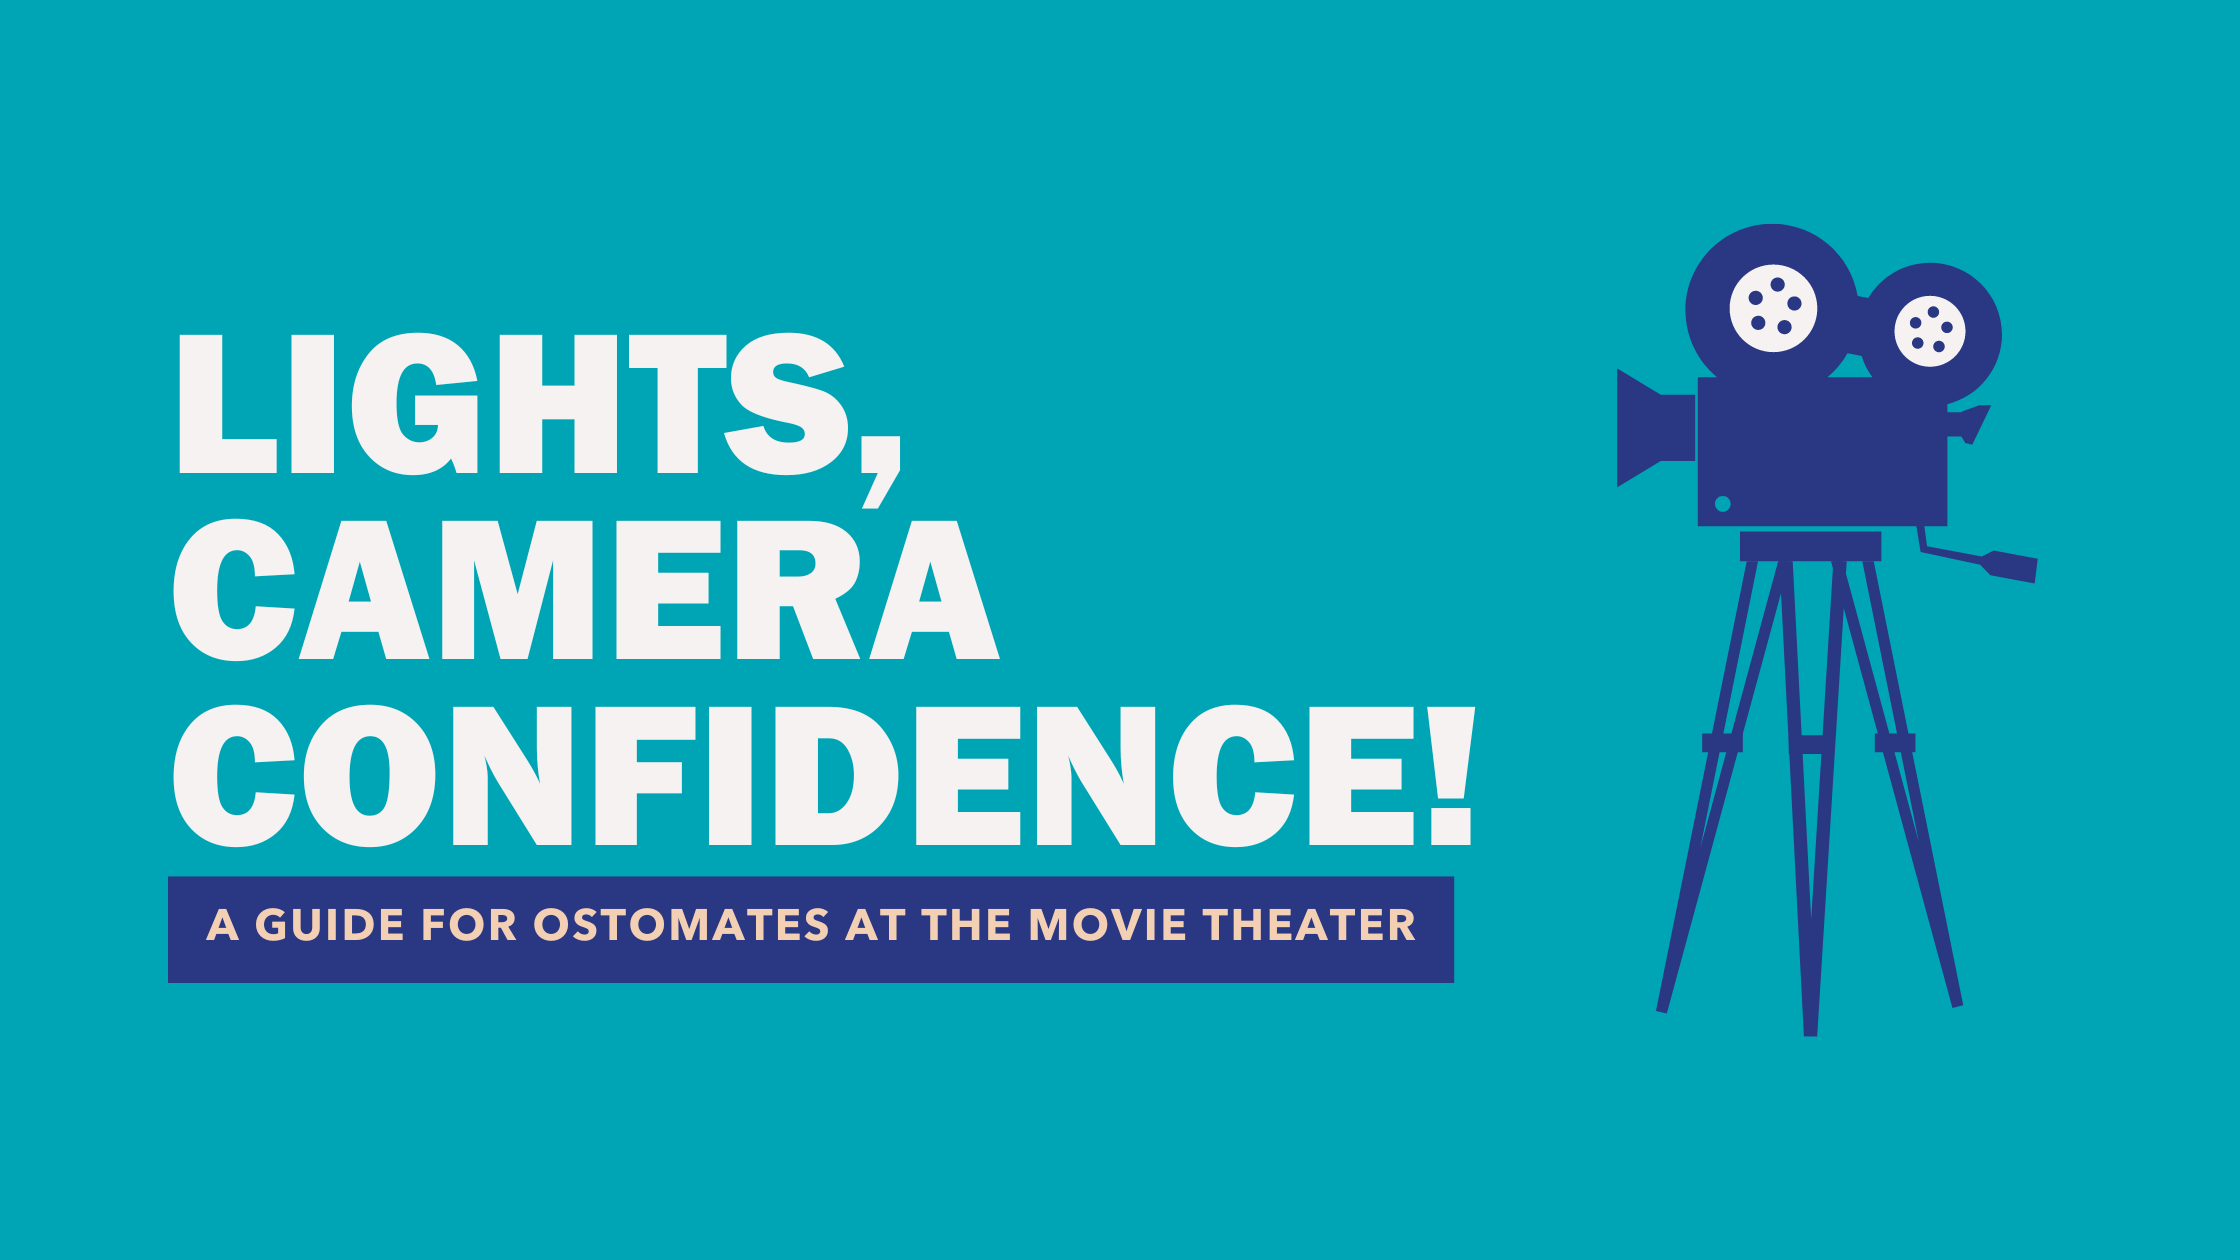 Lights, Camera, Confidence: A Guide for Ostomates at the Movie Theater